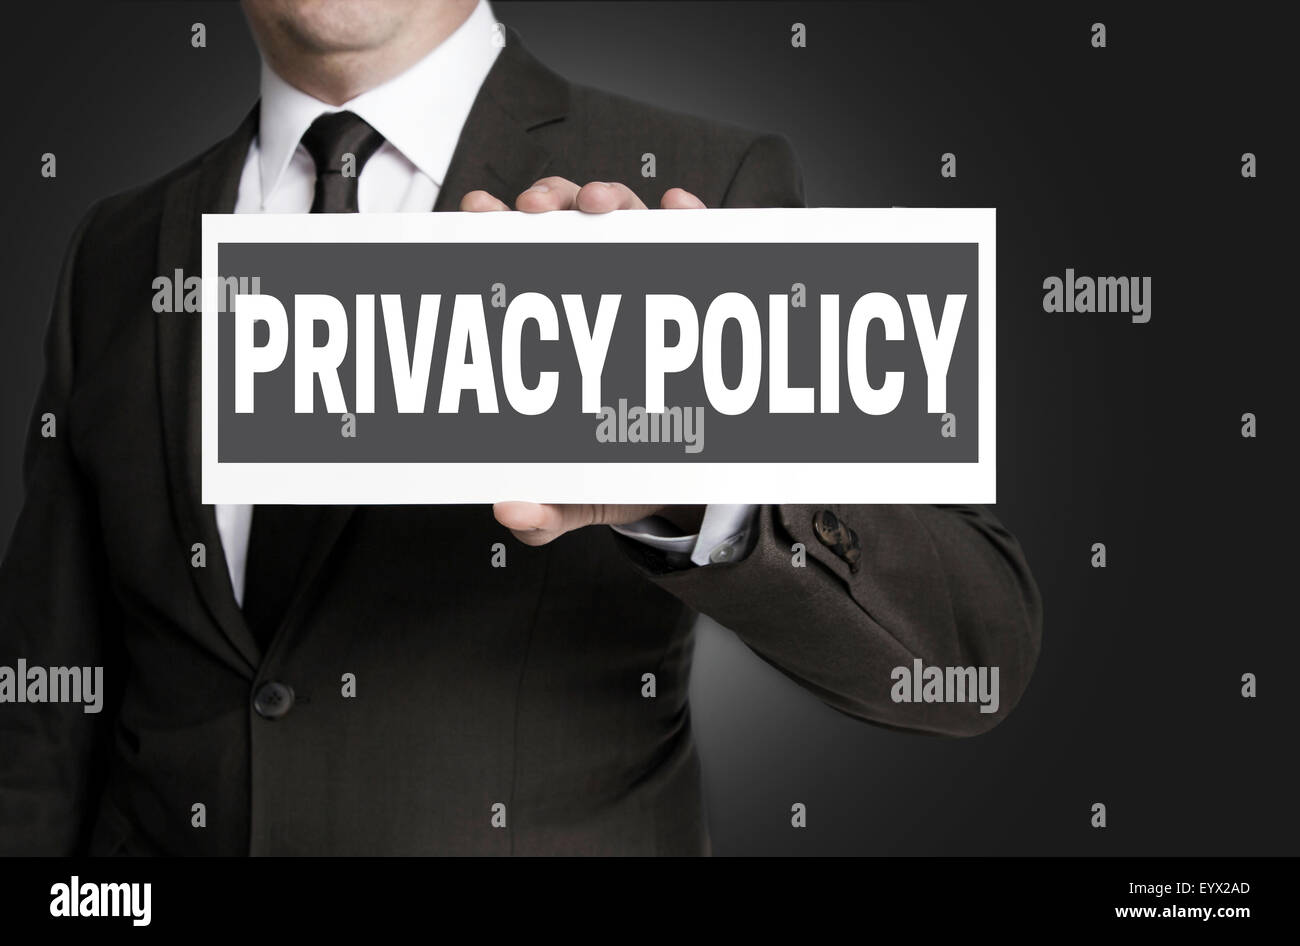 Privacy Policy sign is held by businessman. Stock Photo